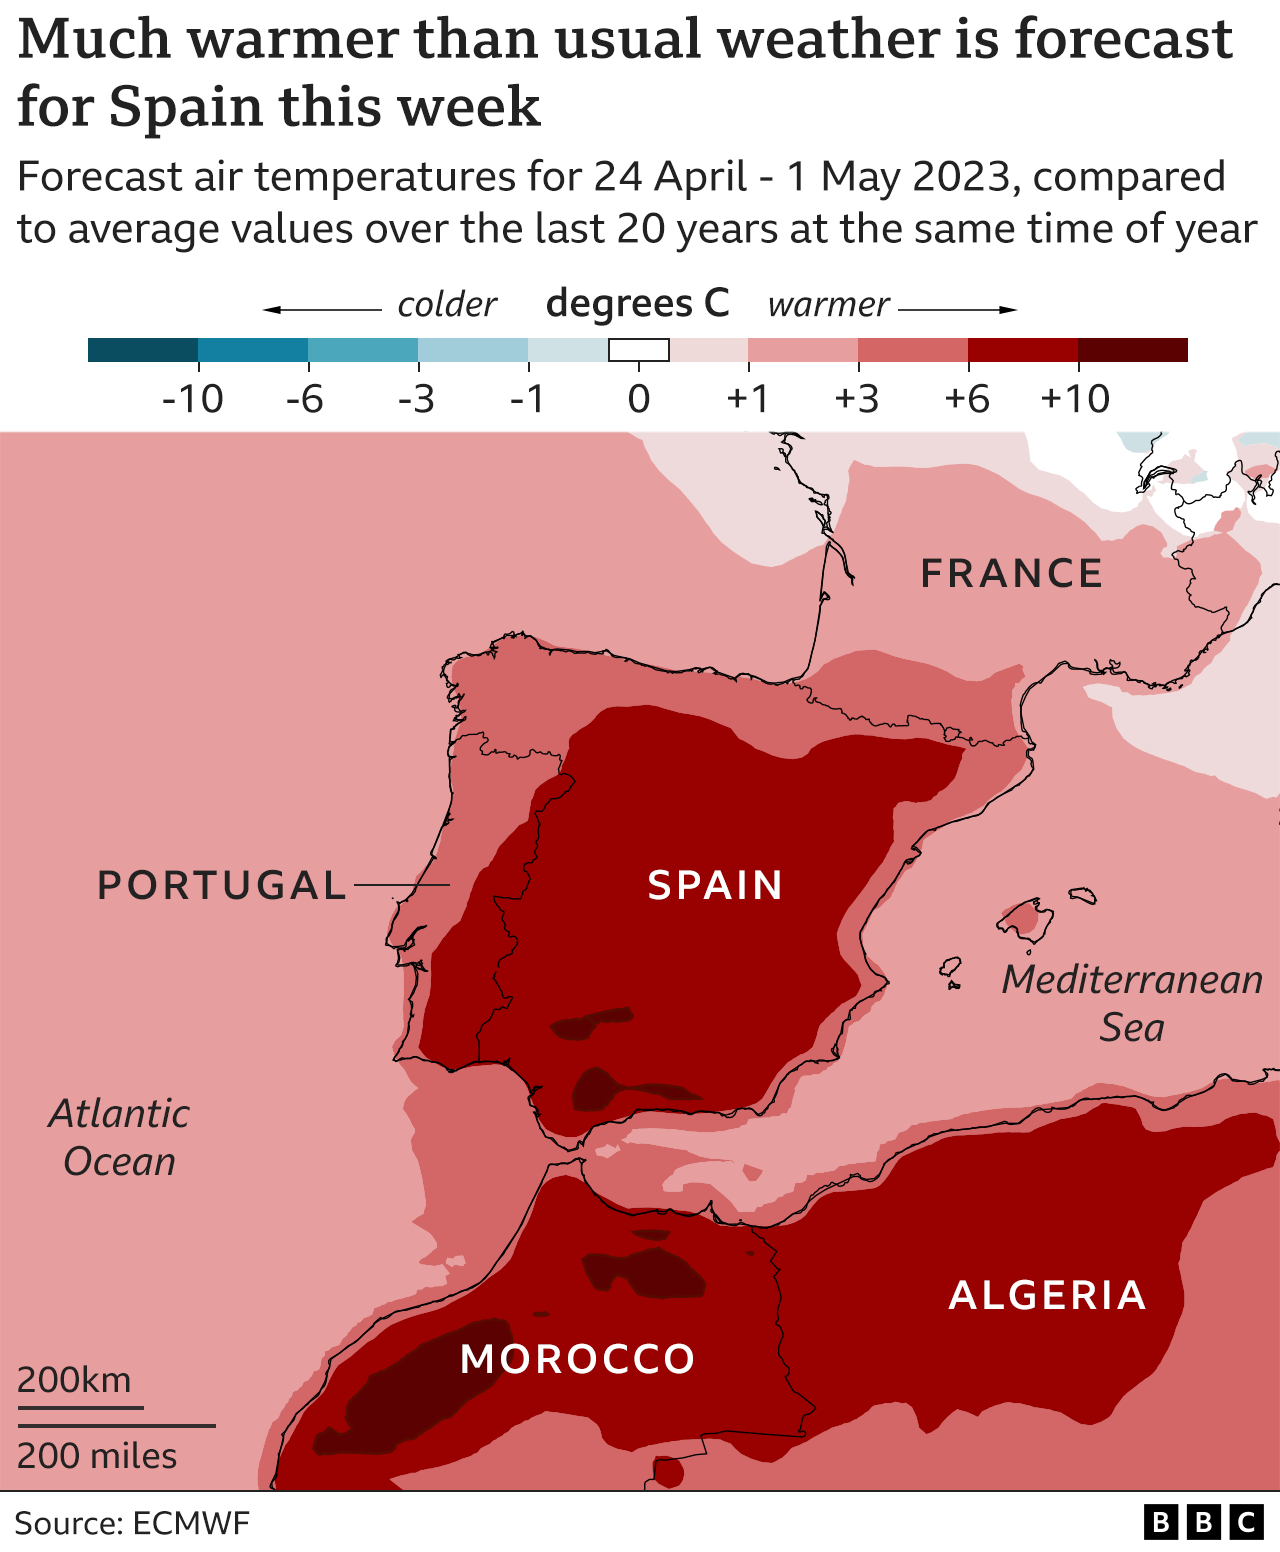 Map showing forecast temperature differences over southwest Europe and northwest Africa for the week 24 April - 1 May compared to the last 20 years at the same time of year. Much of Spain is between 6 and 10C warmer than normal - and in places this is more than 10C. Temperatures are also especially high in north Morocco and north Algeria, and are above average for the entire region.